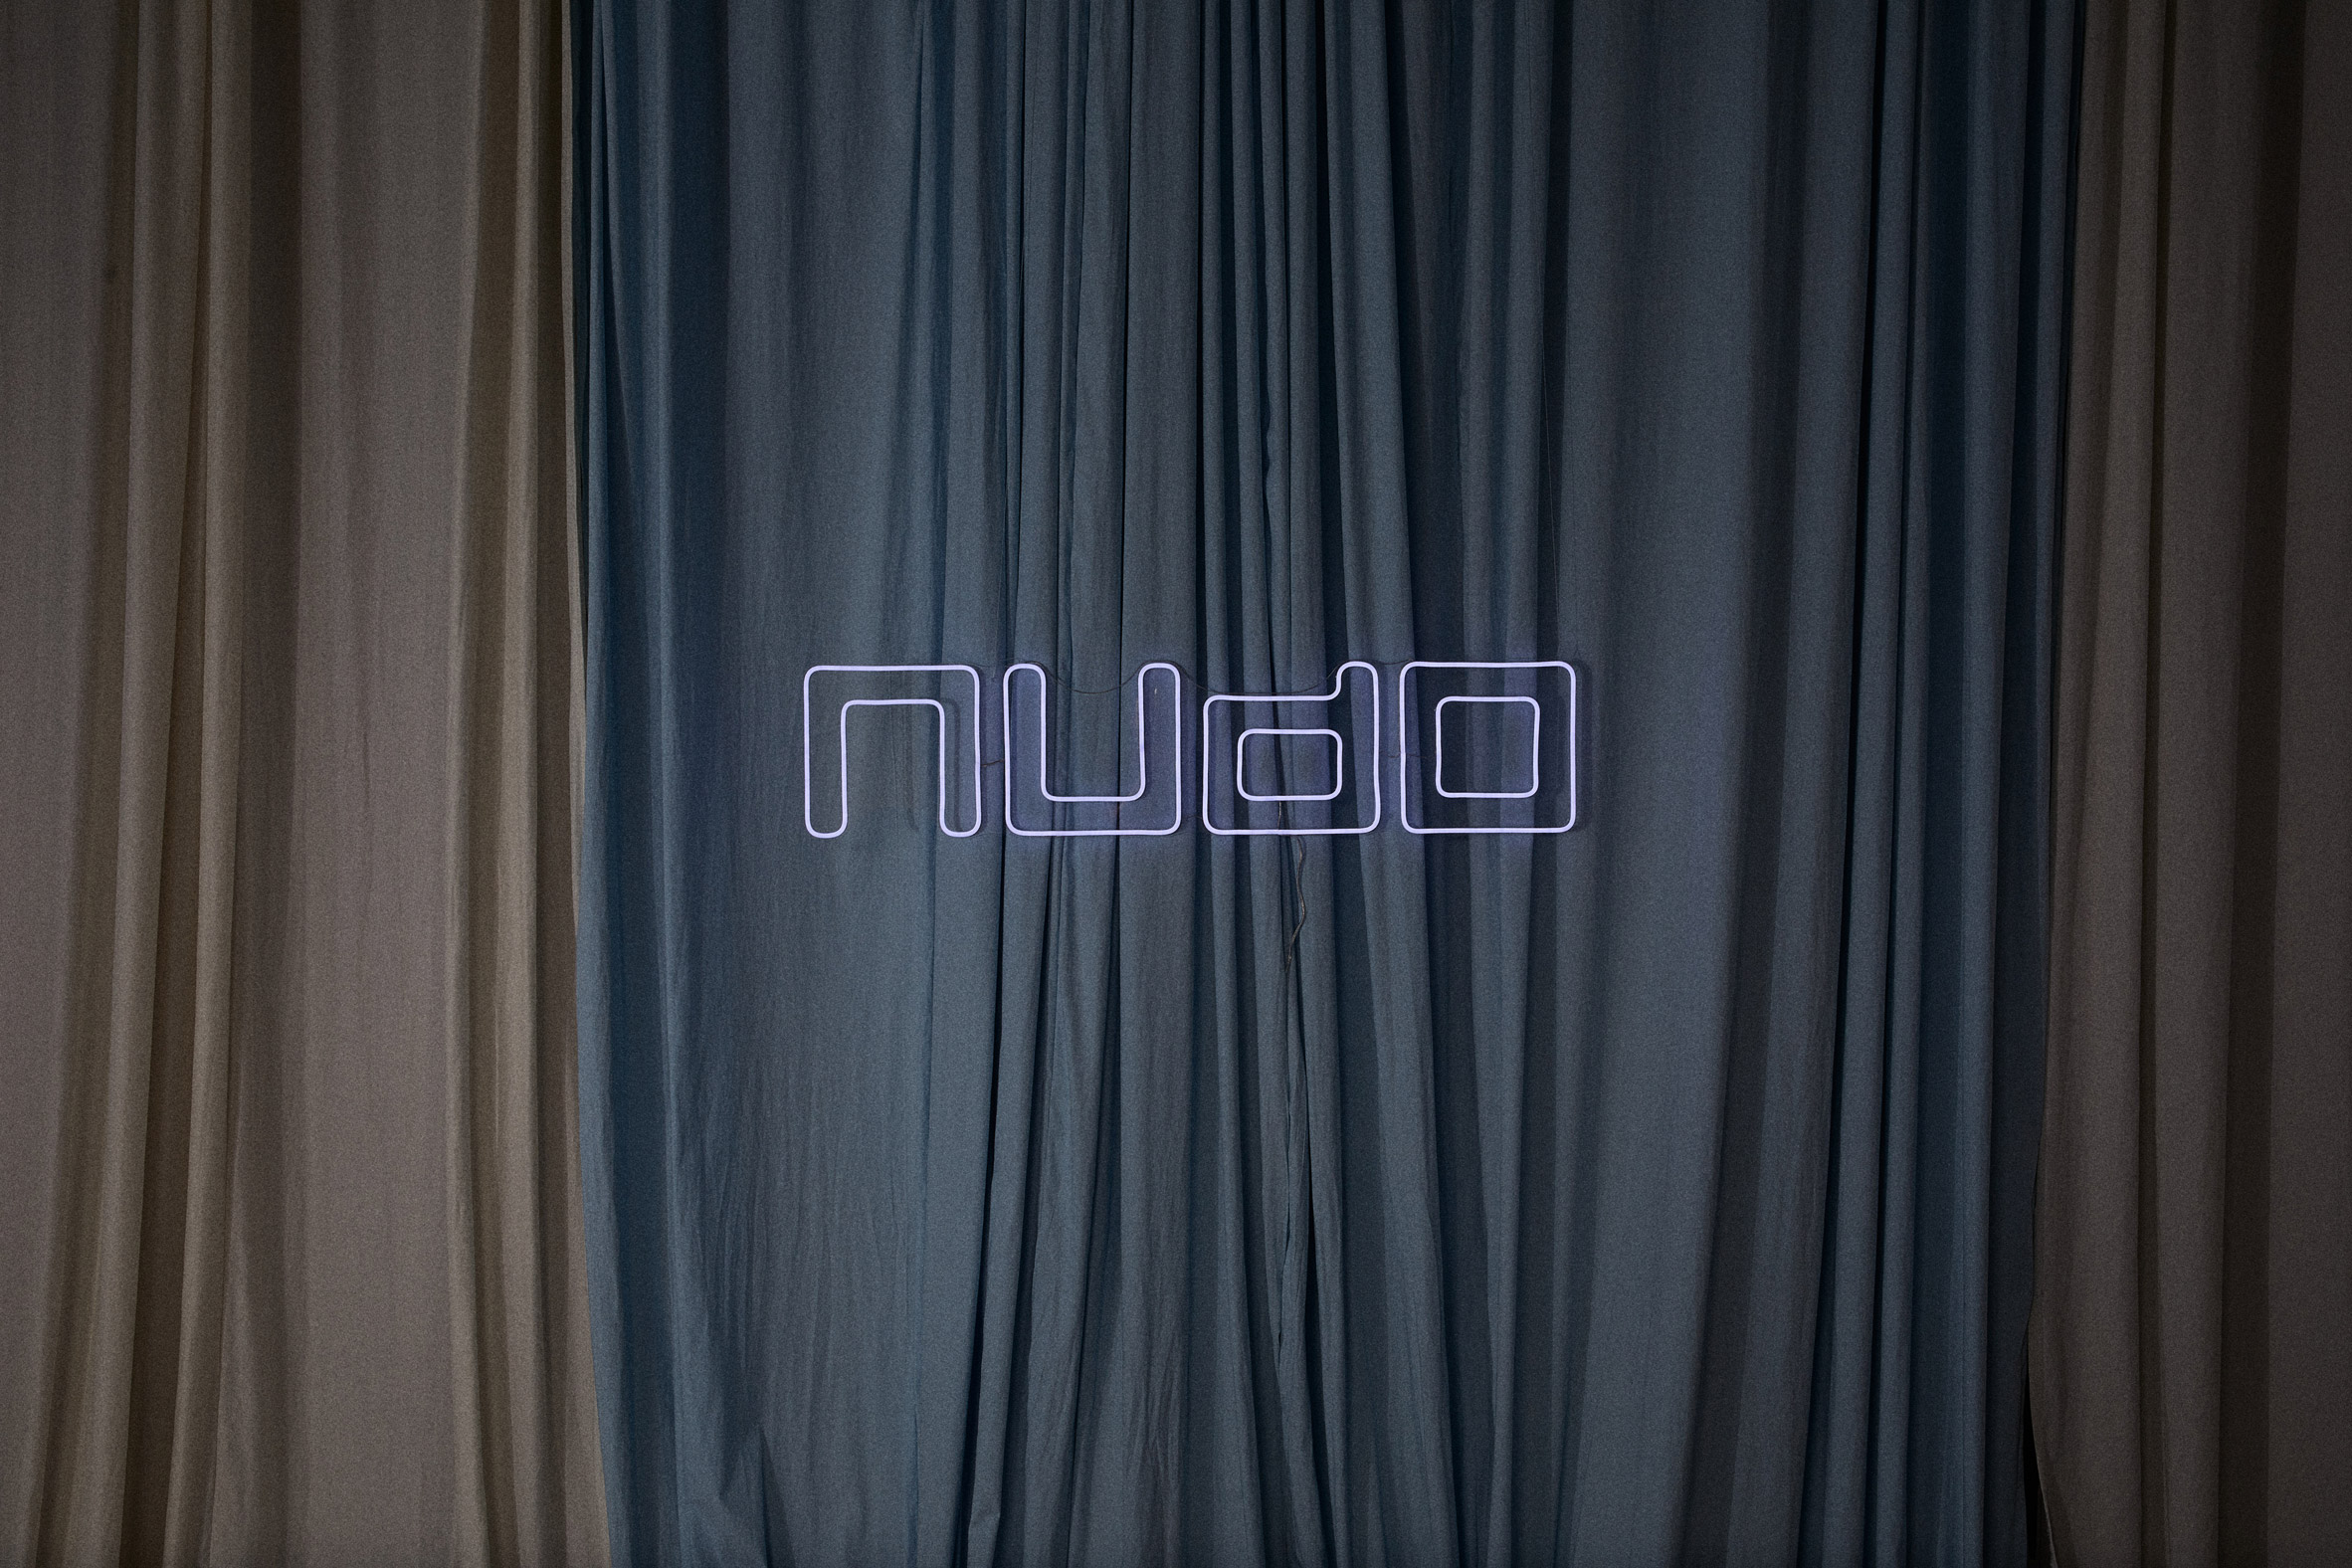 Nudo sign in front of draped fabrics